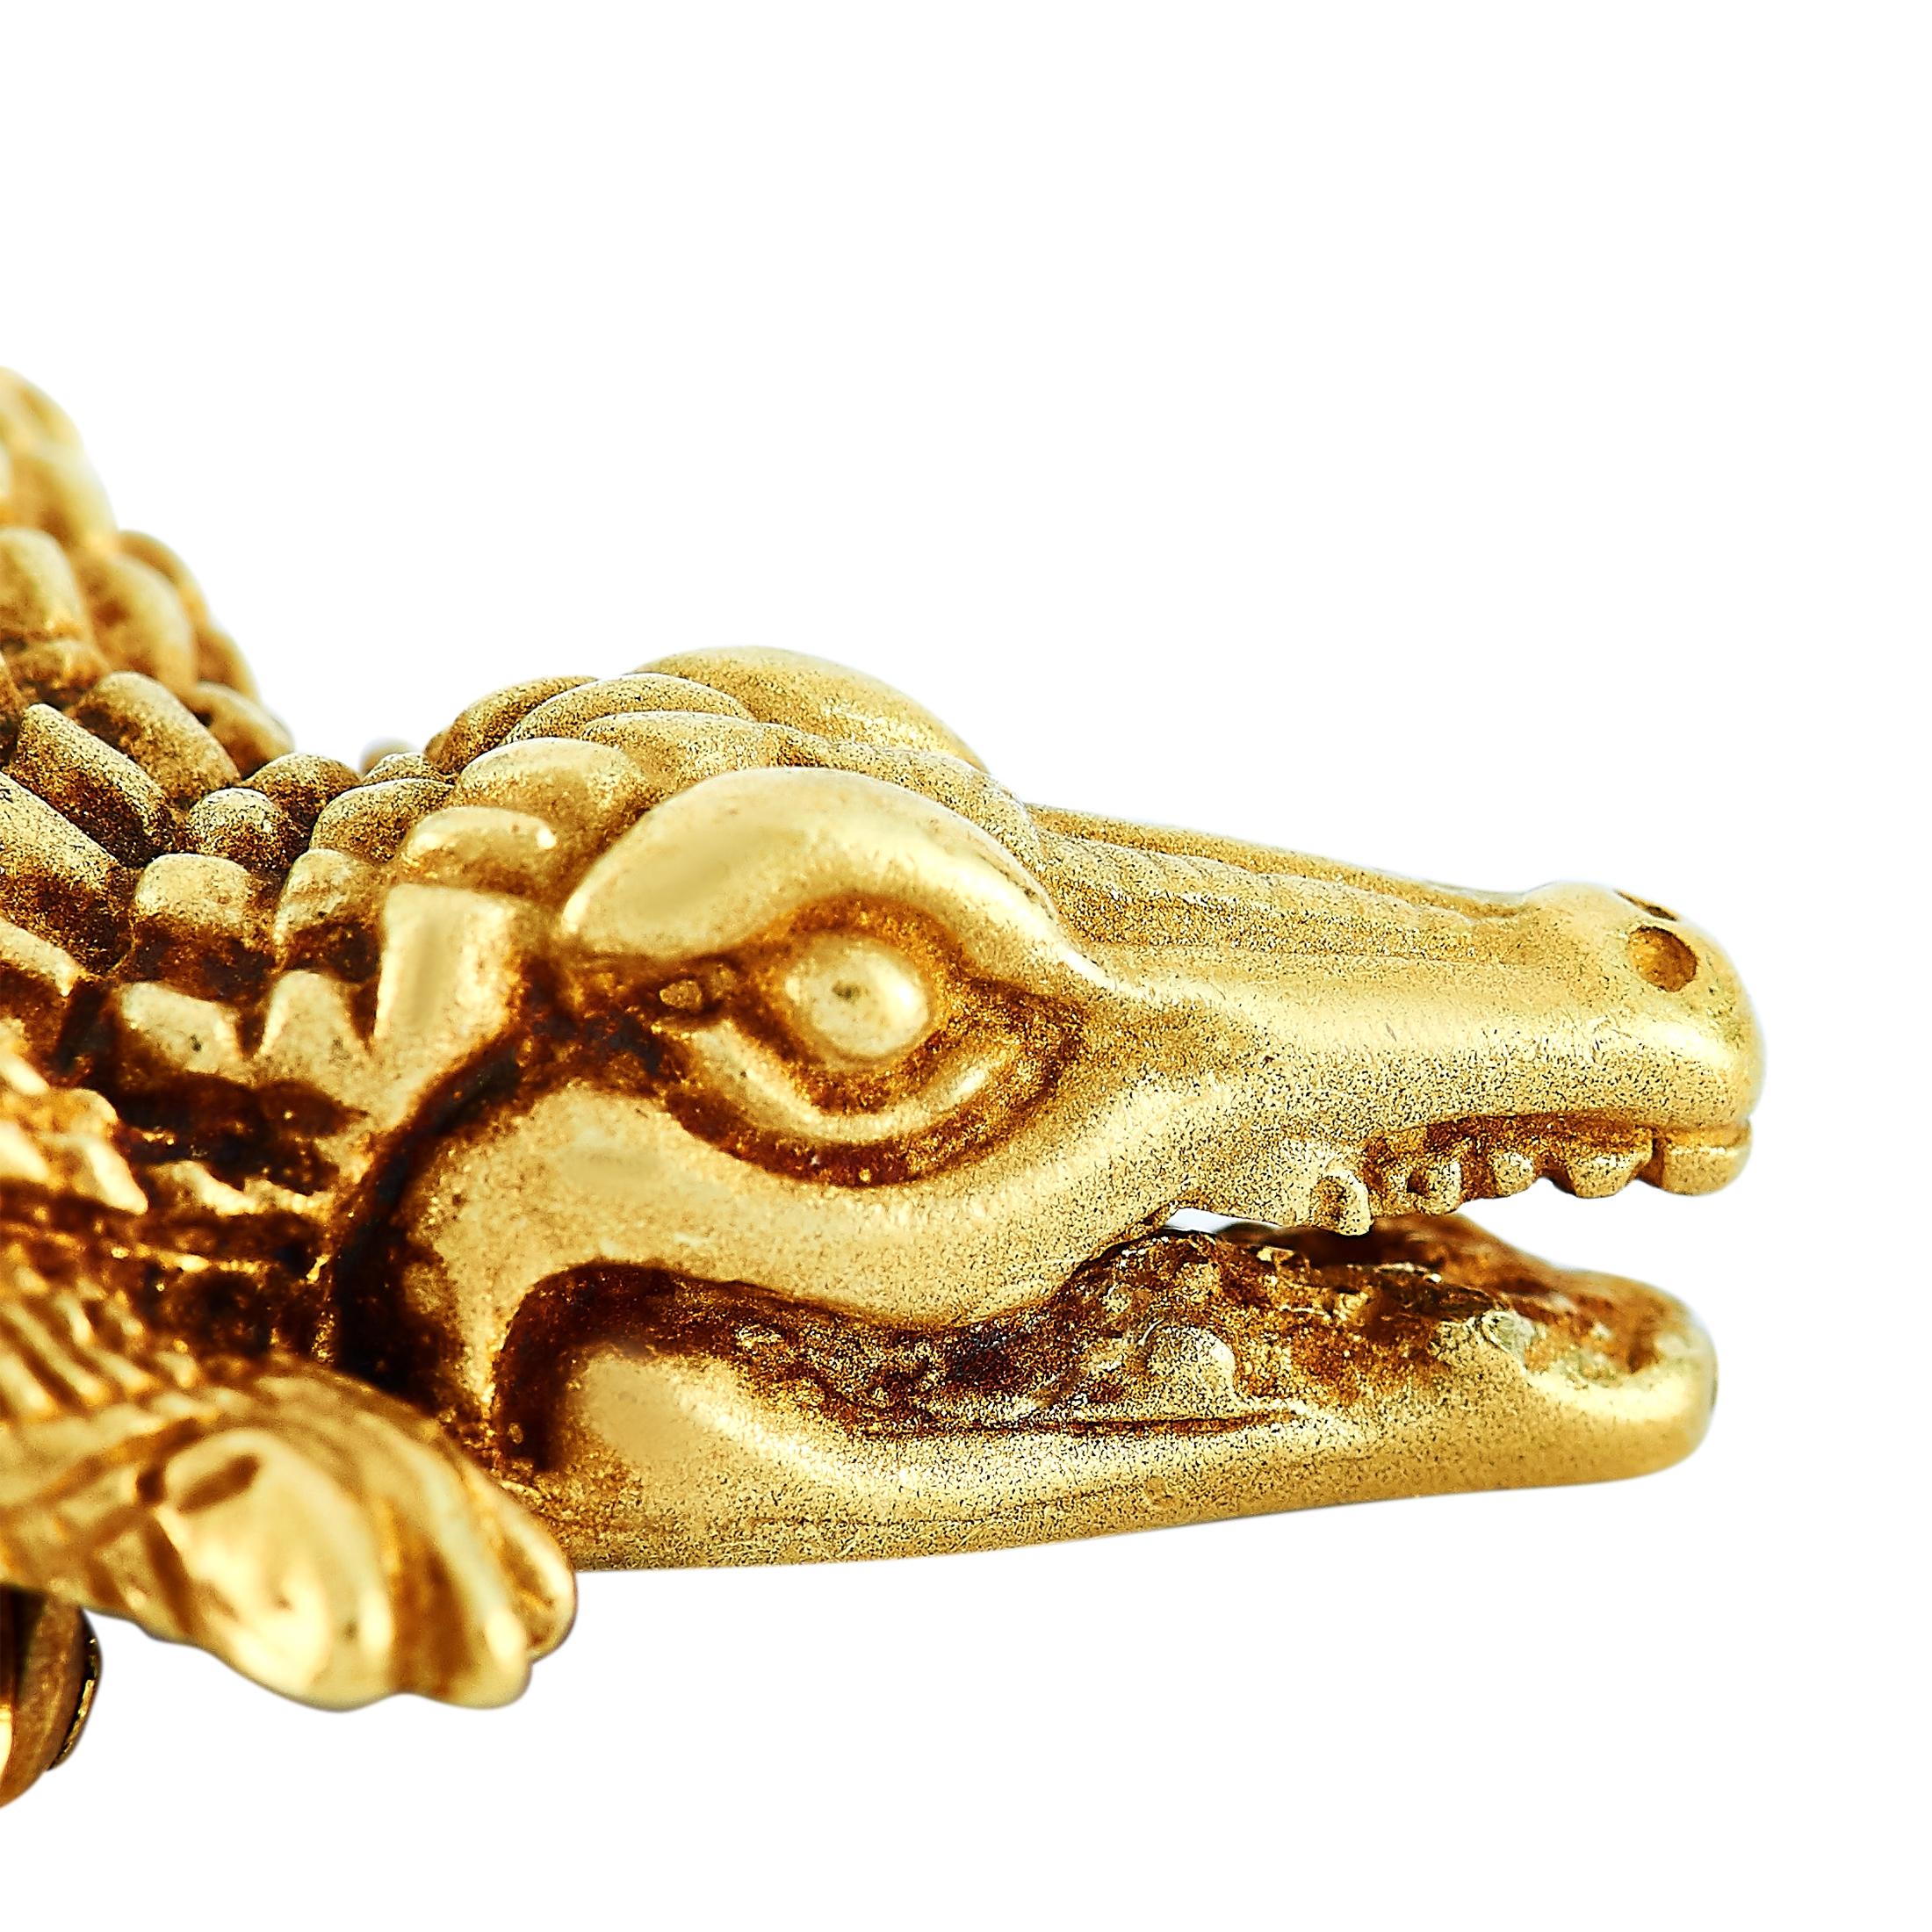 This Kieselstein-Cord alligator brooch is made of 18K yellow gold and weighs 10.5 grams. It measures 1.50” in length and 0.75” in width.
 
 The brooch is offered in estate condition and includes a gift box.